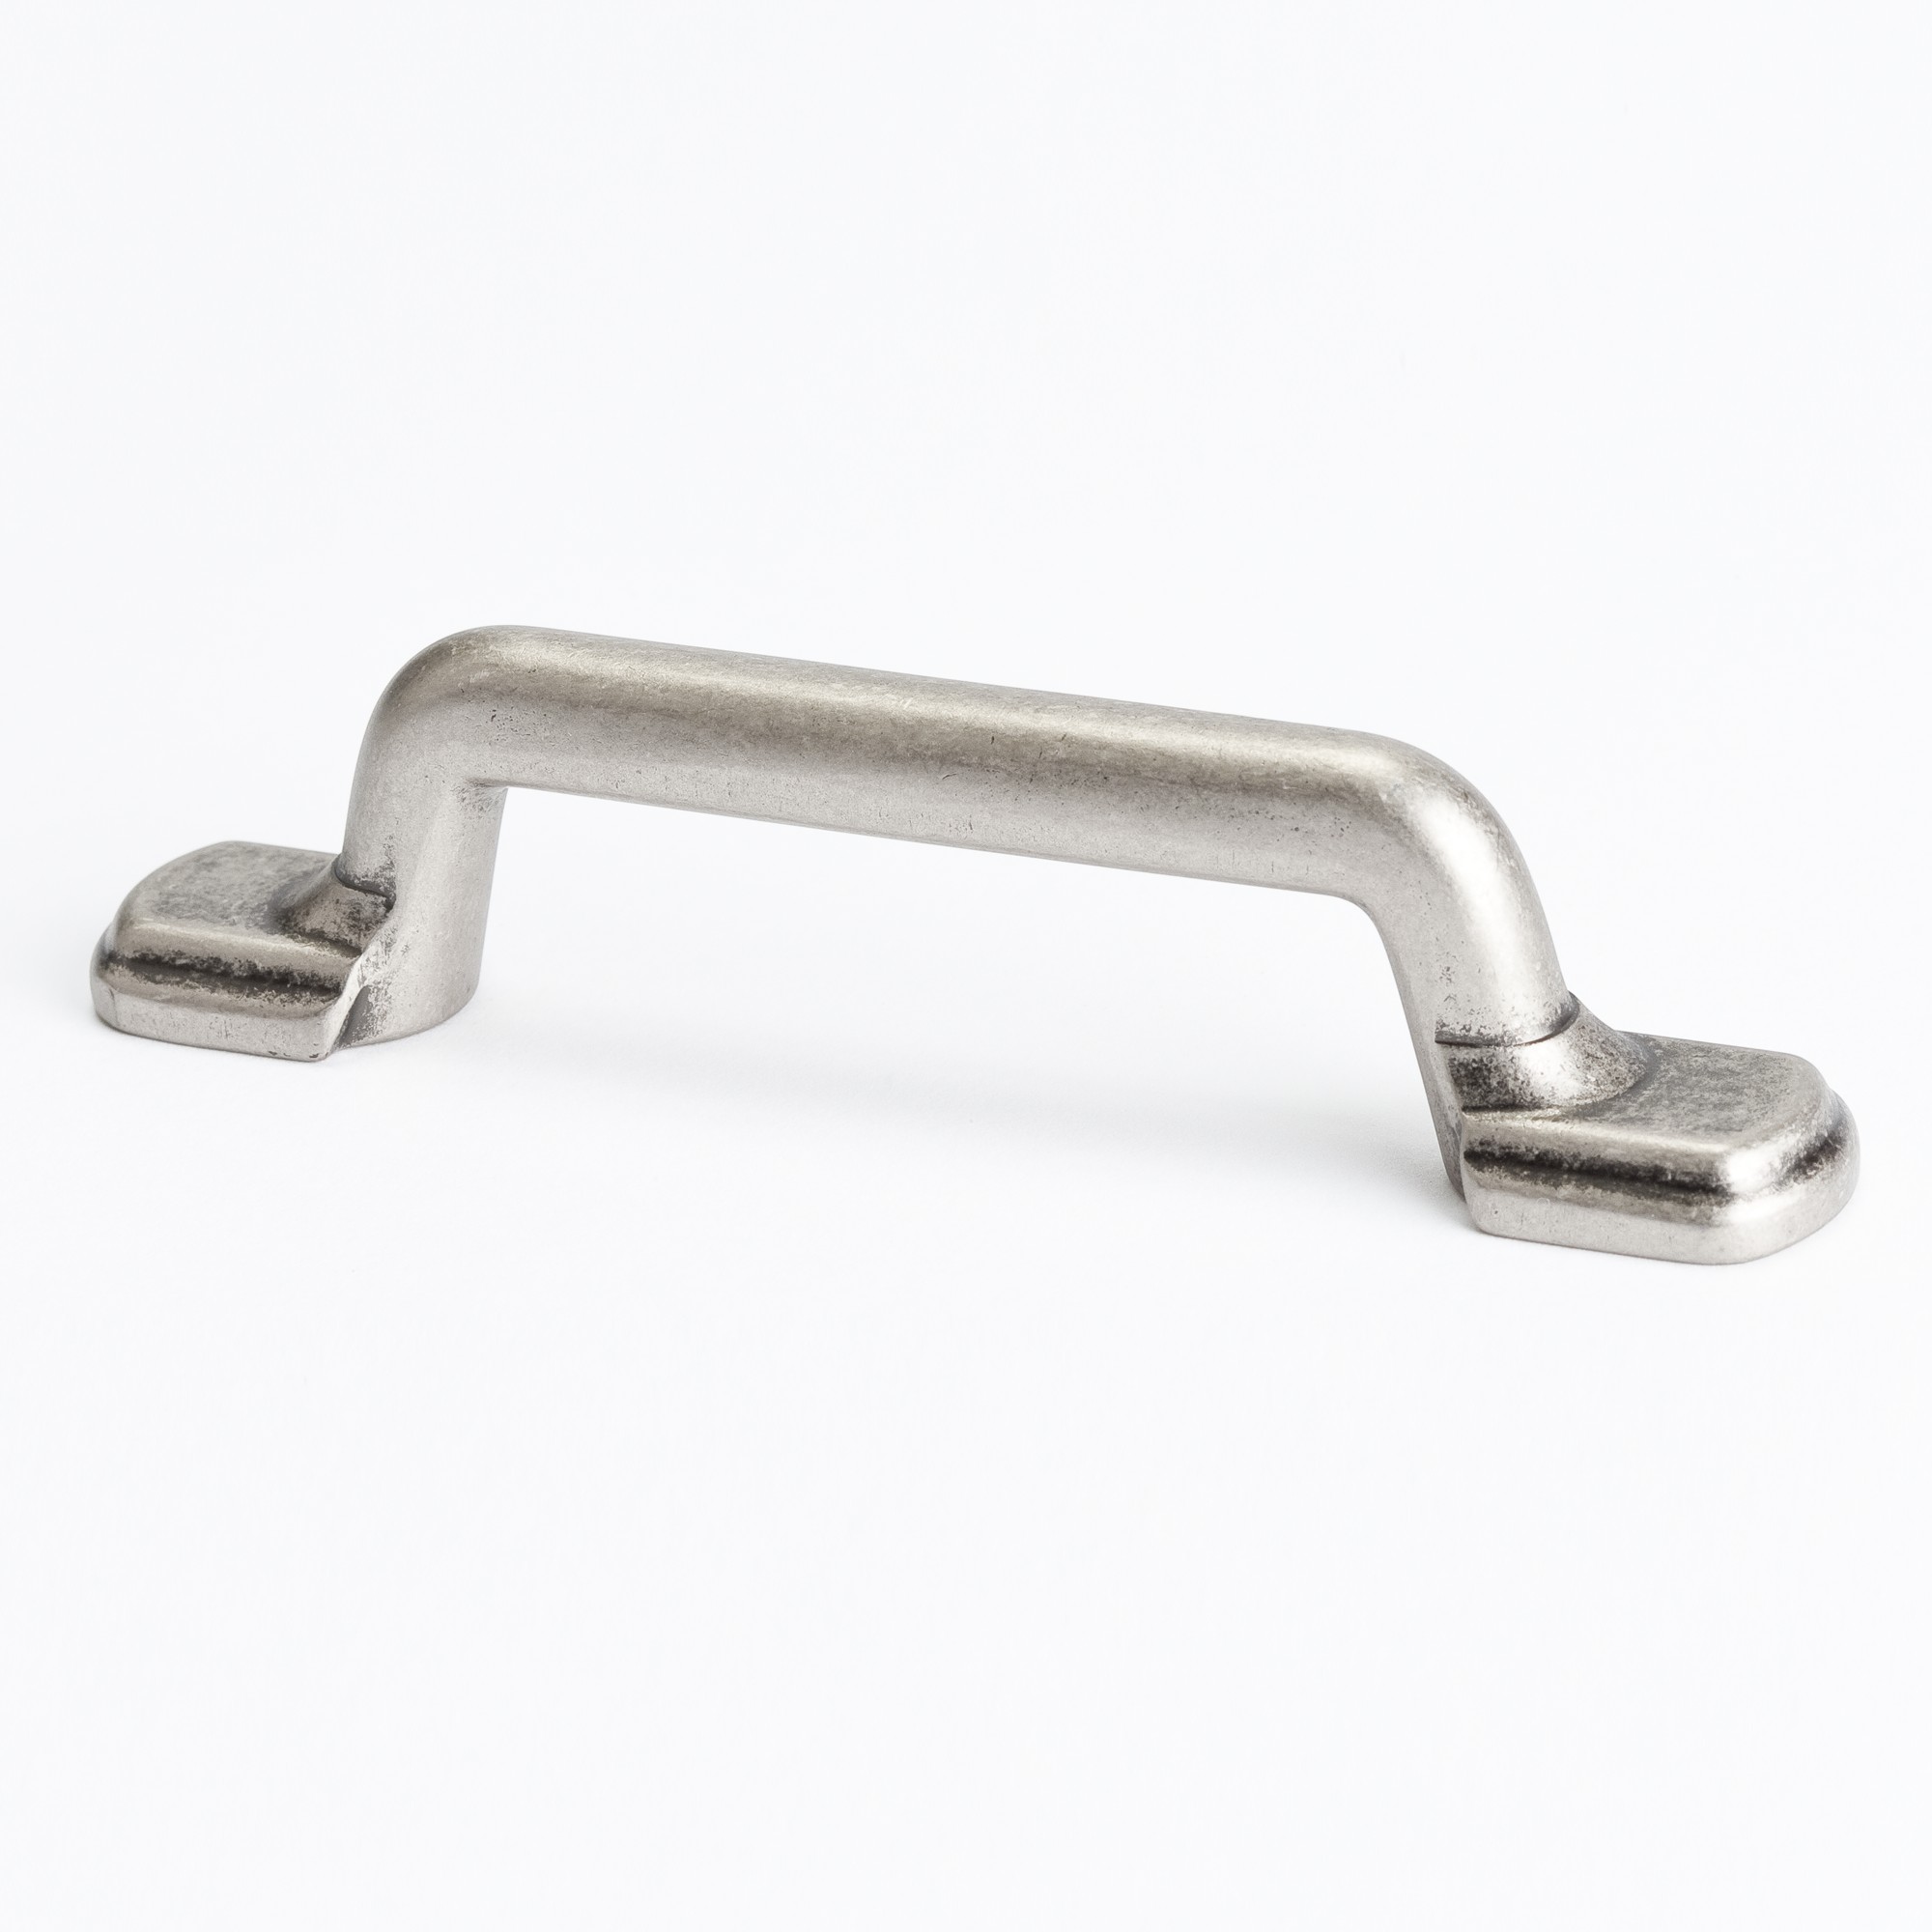 Advantage Plus 2 3" Pull in Weathered Nickel